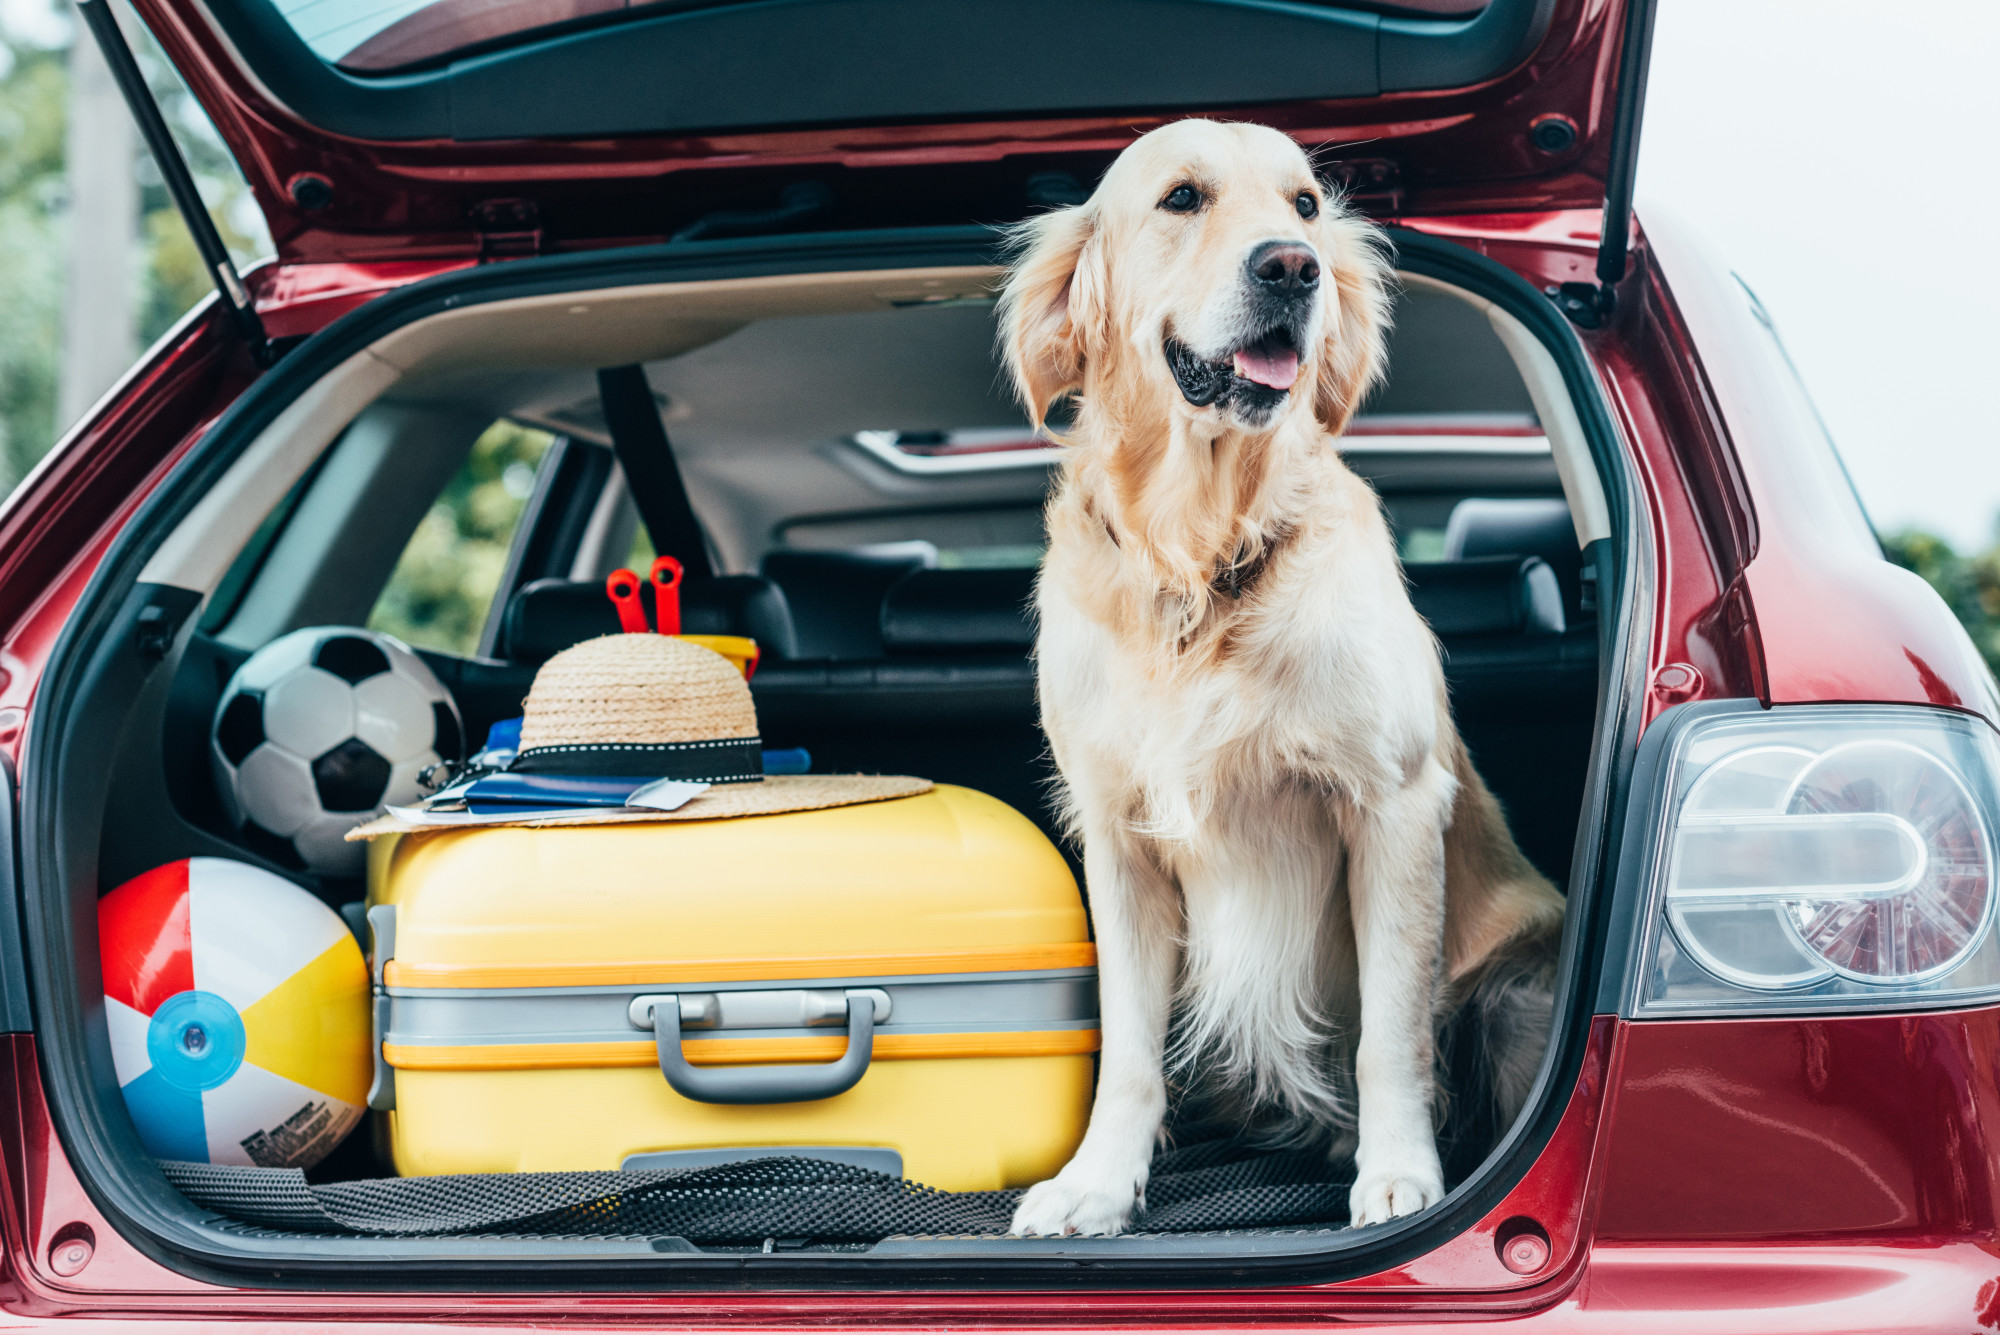 6 Crucial Tips for Traveling With a Dog